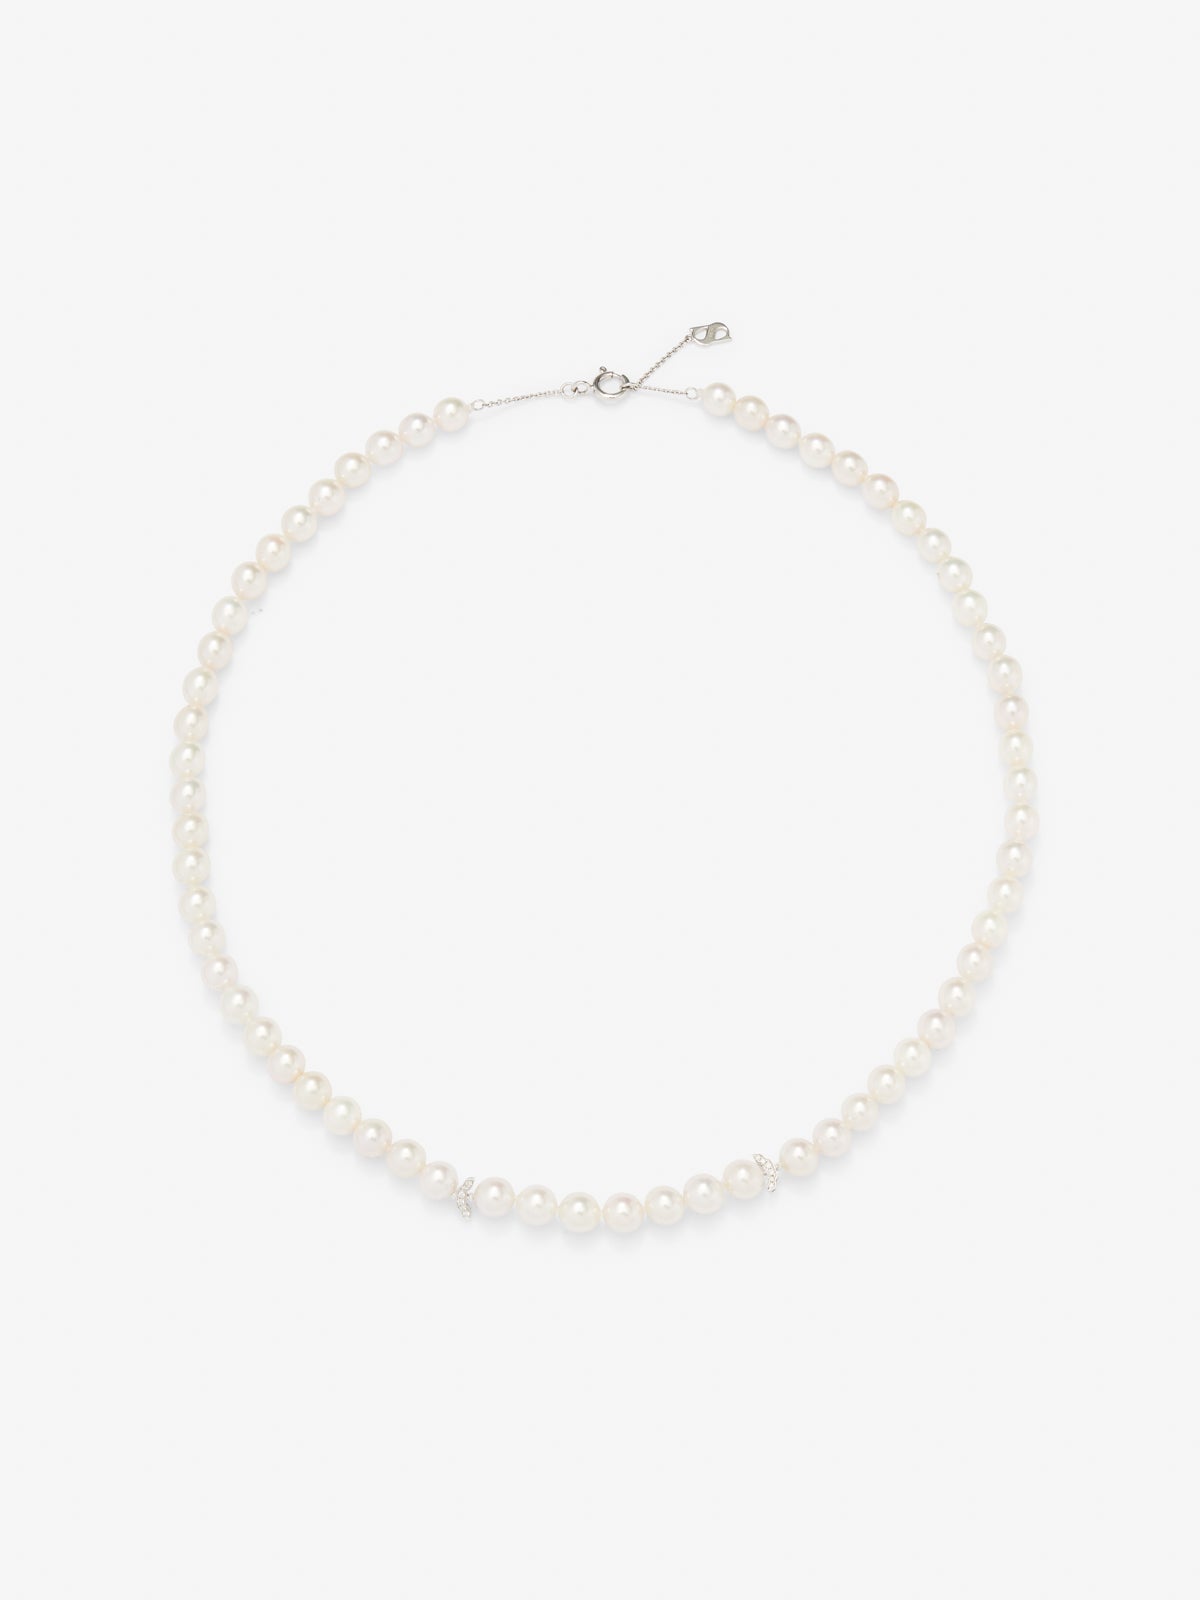 18K white gold necklace with pearls Akoya